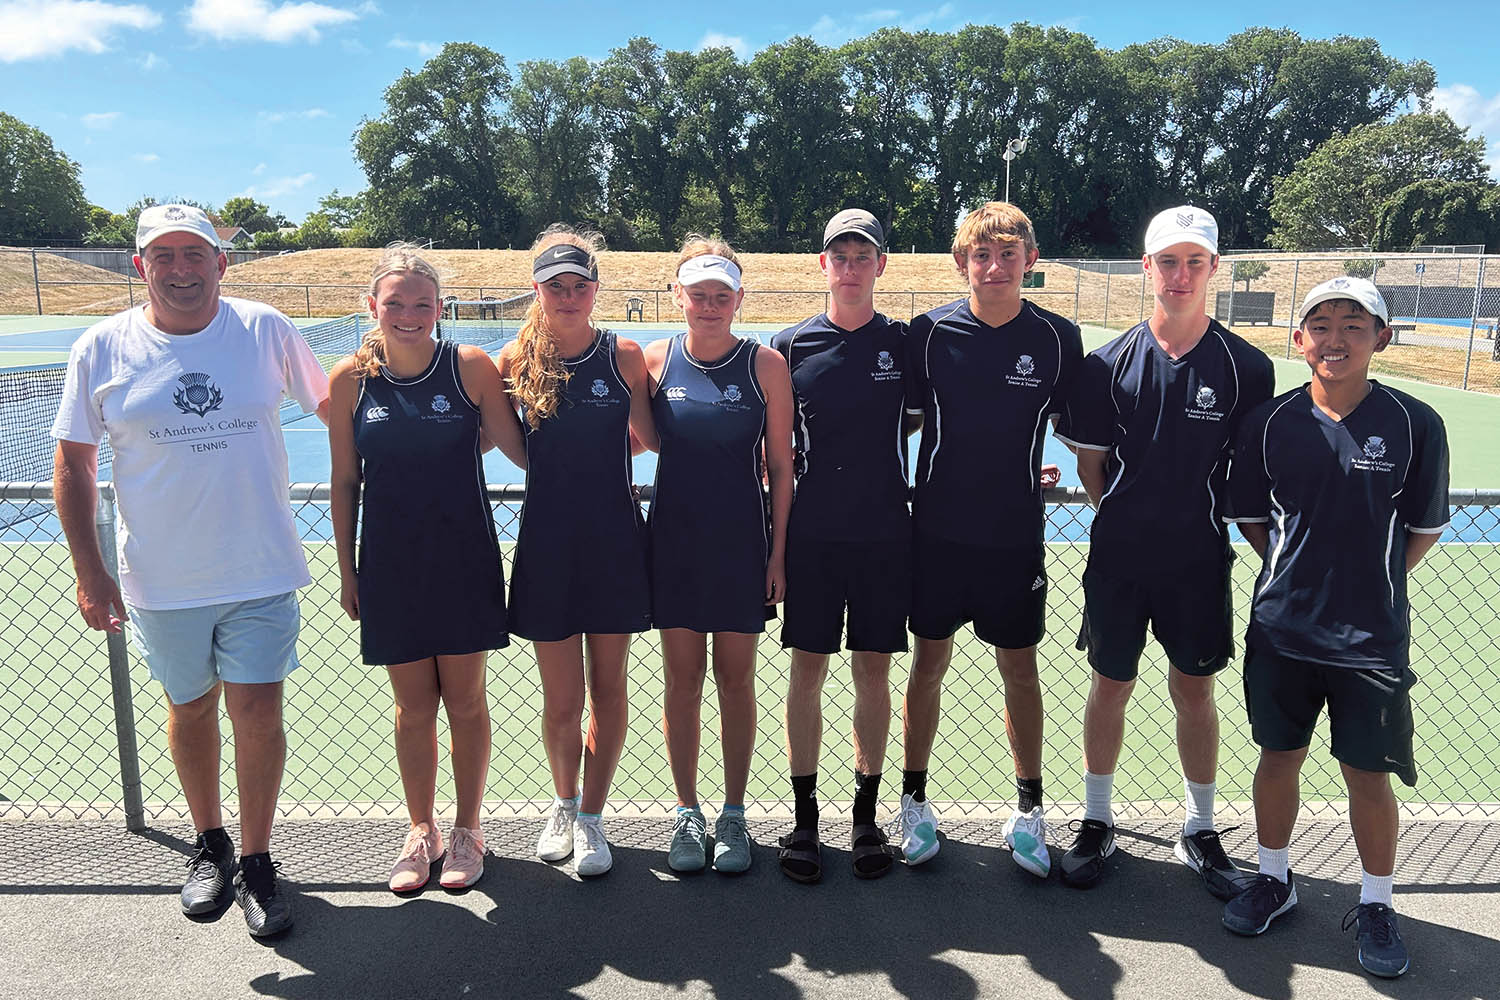 St Andrew's College tennis players at the South Island Secondary Schools' Tennis Championships.